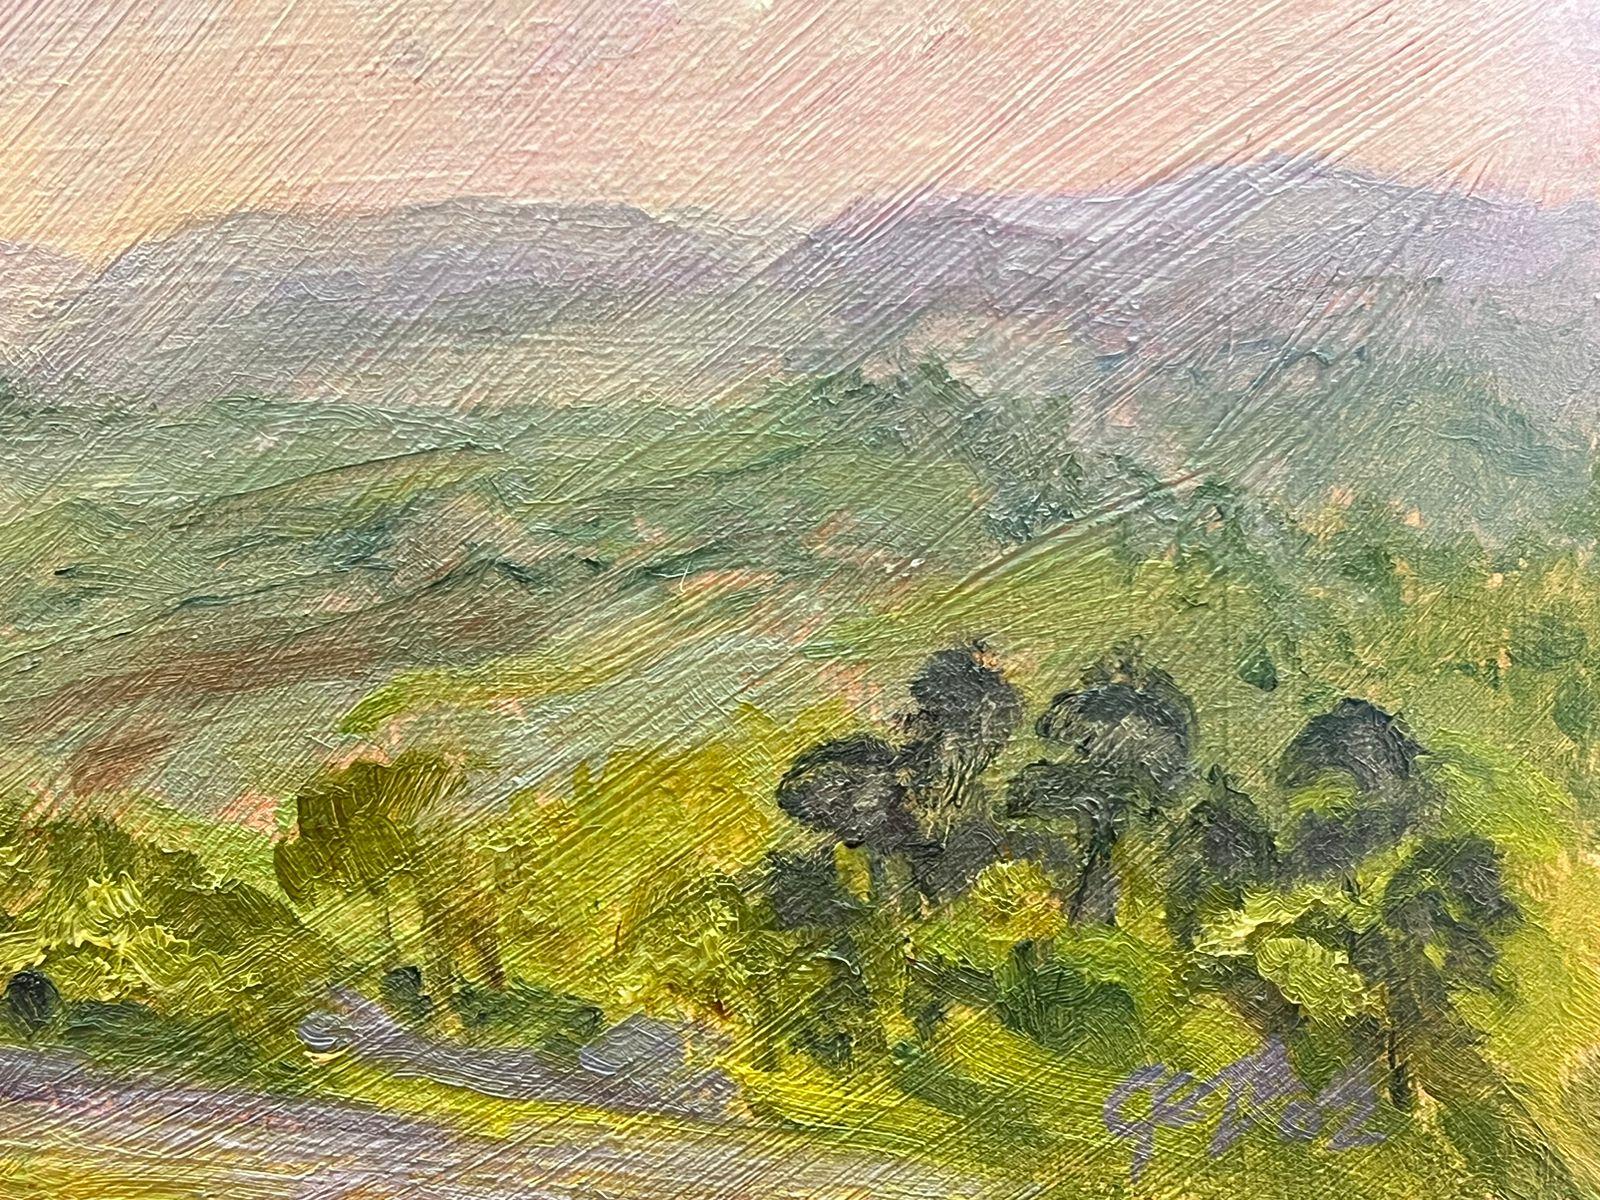 Landscape  
signed by Geza Somerset-Paddon (British 20th century)
dated 02'
oil painting on board, unframed
size: 8 x 10 inches
inscribed verso
condition: overall very good
provenance: all the paintings we have by this artist have come from their